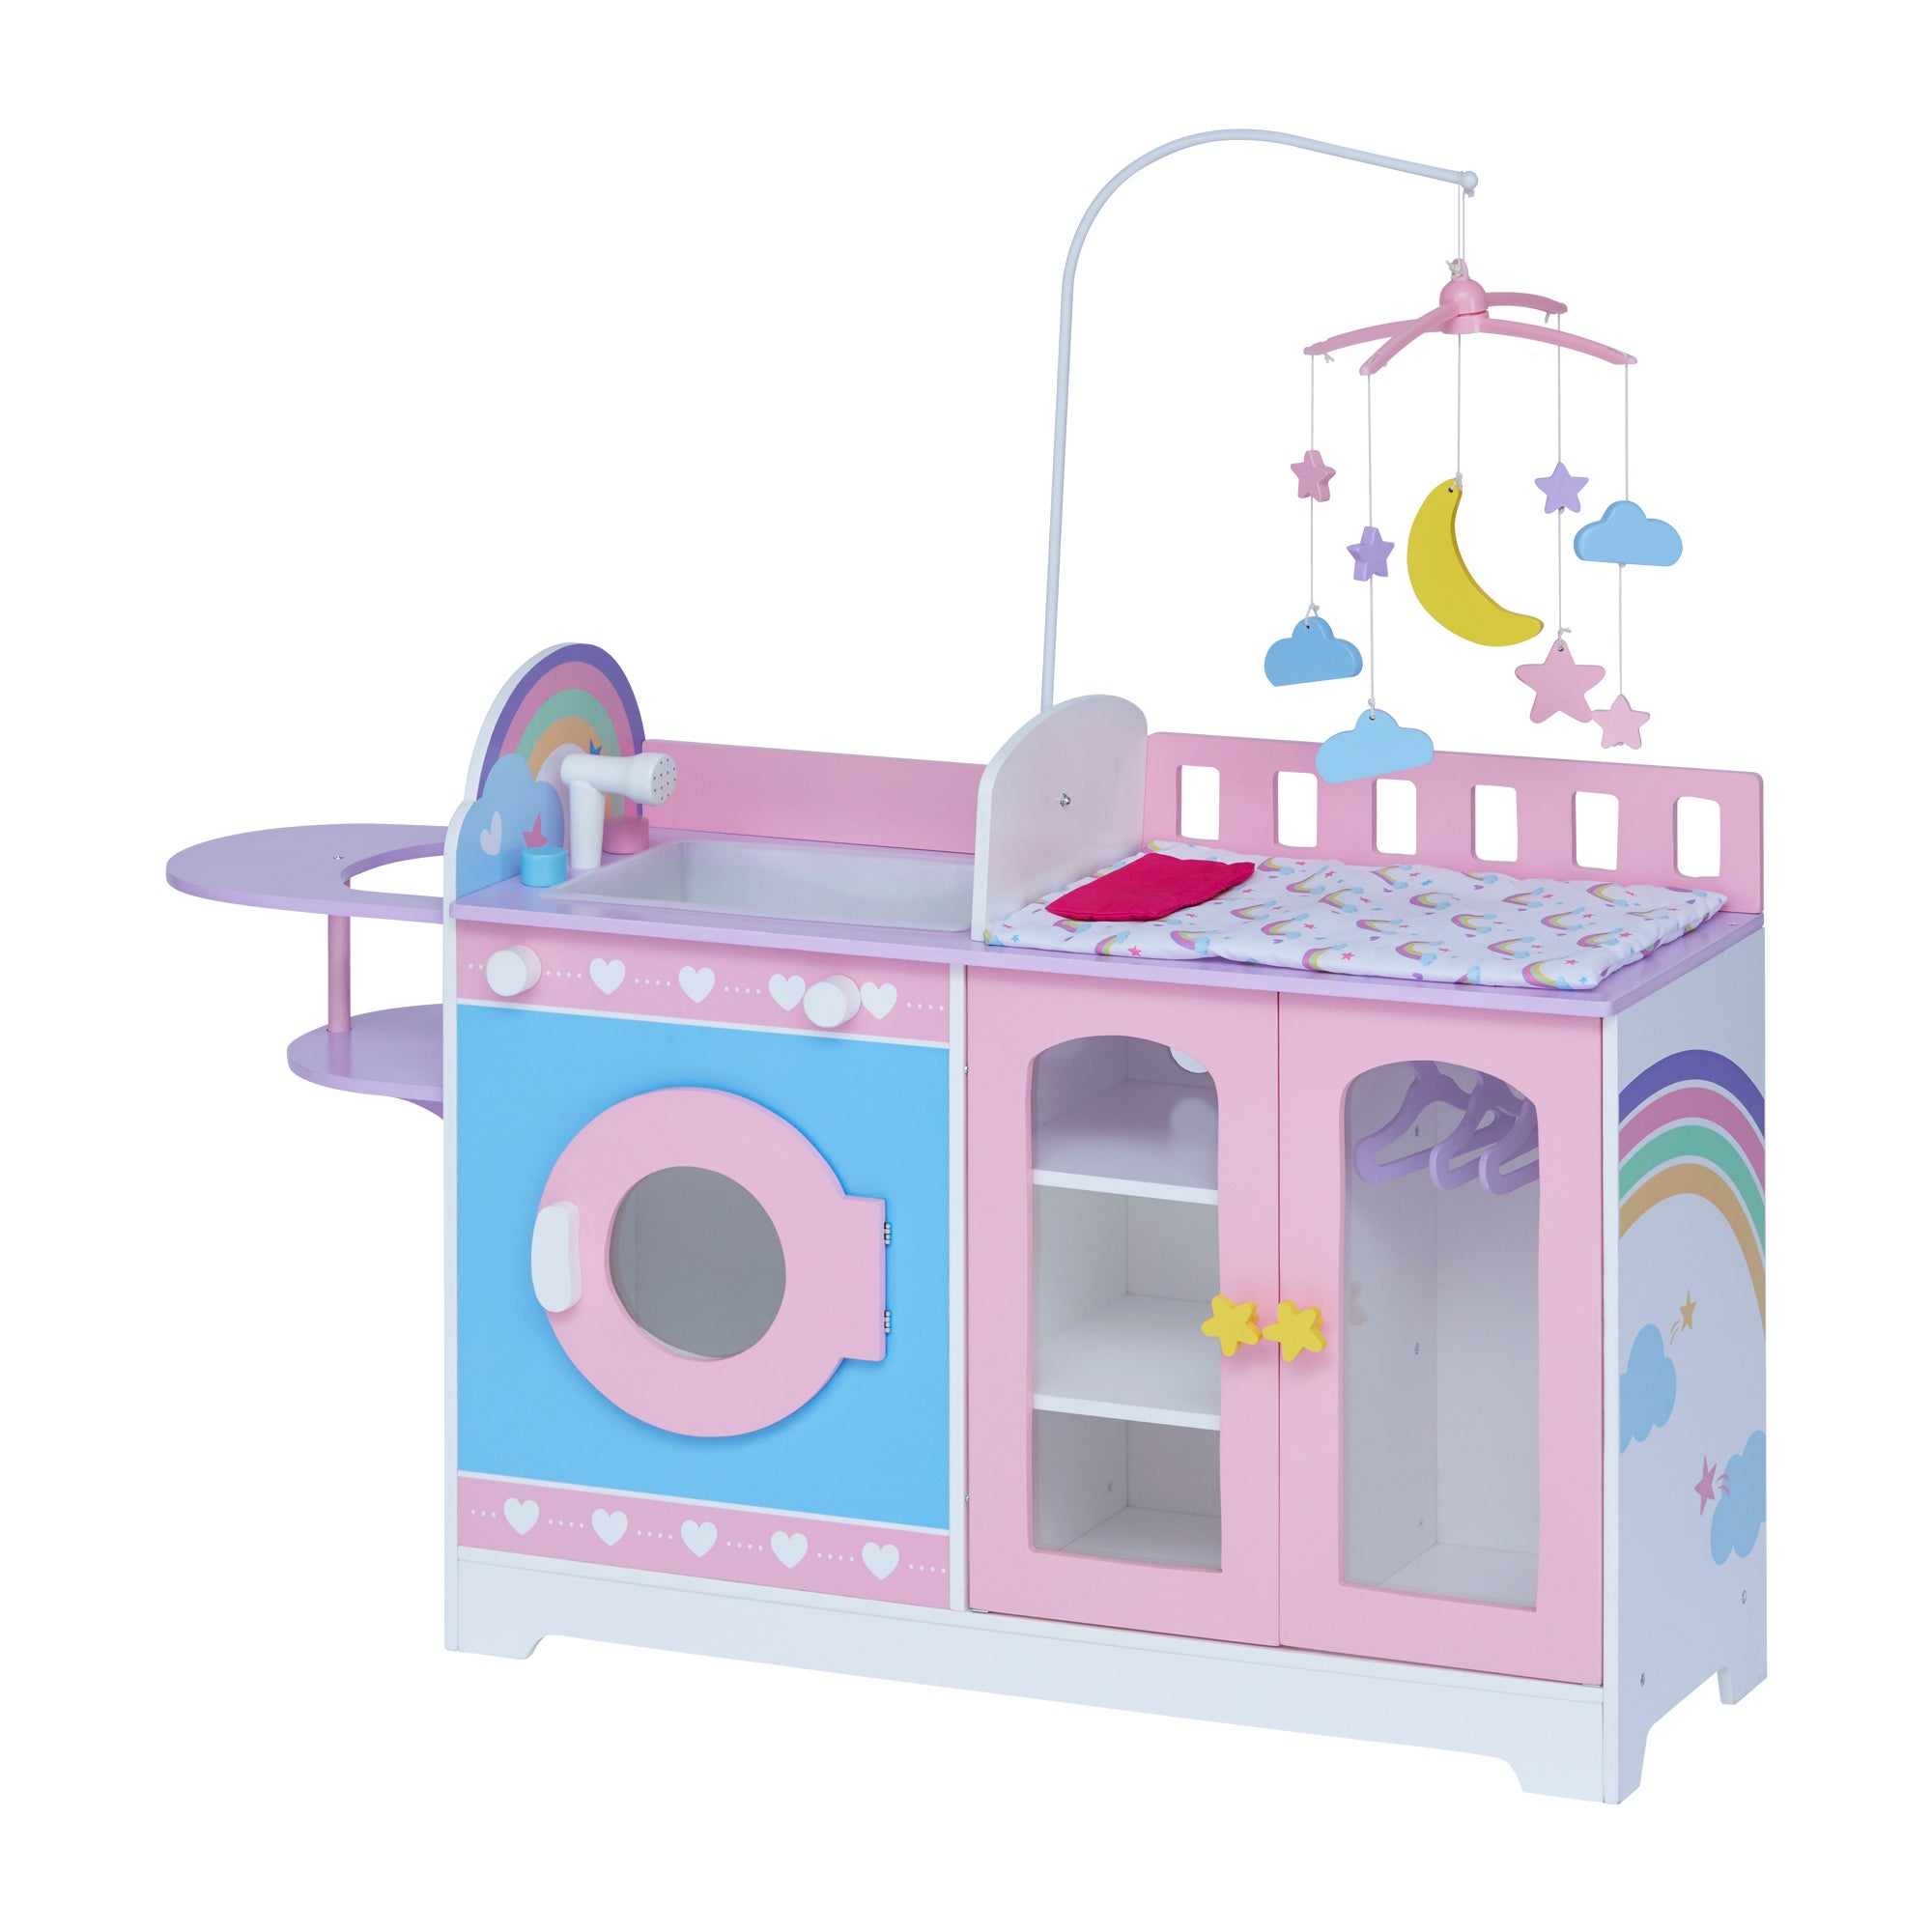 Teamson Kids - Olivia's Classic 6 in 1 Baby Doll Changing Station with Storage - Pink / Purple